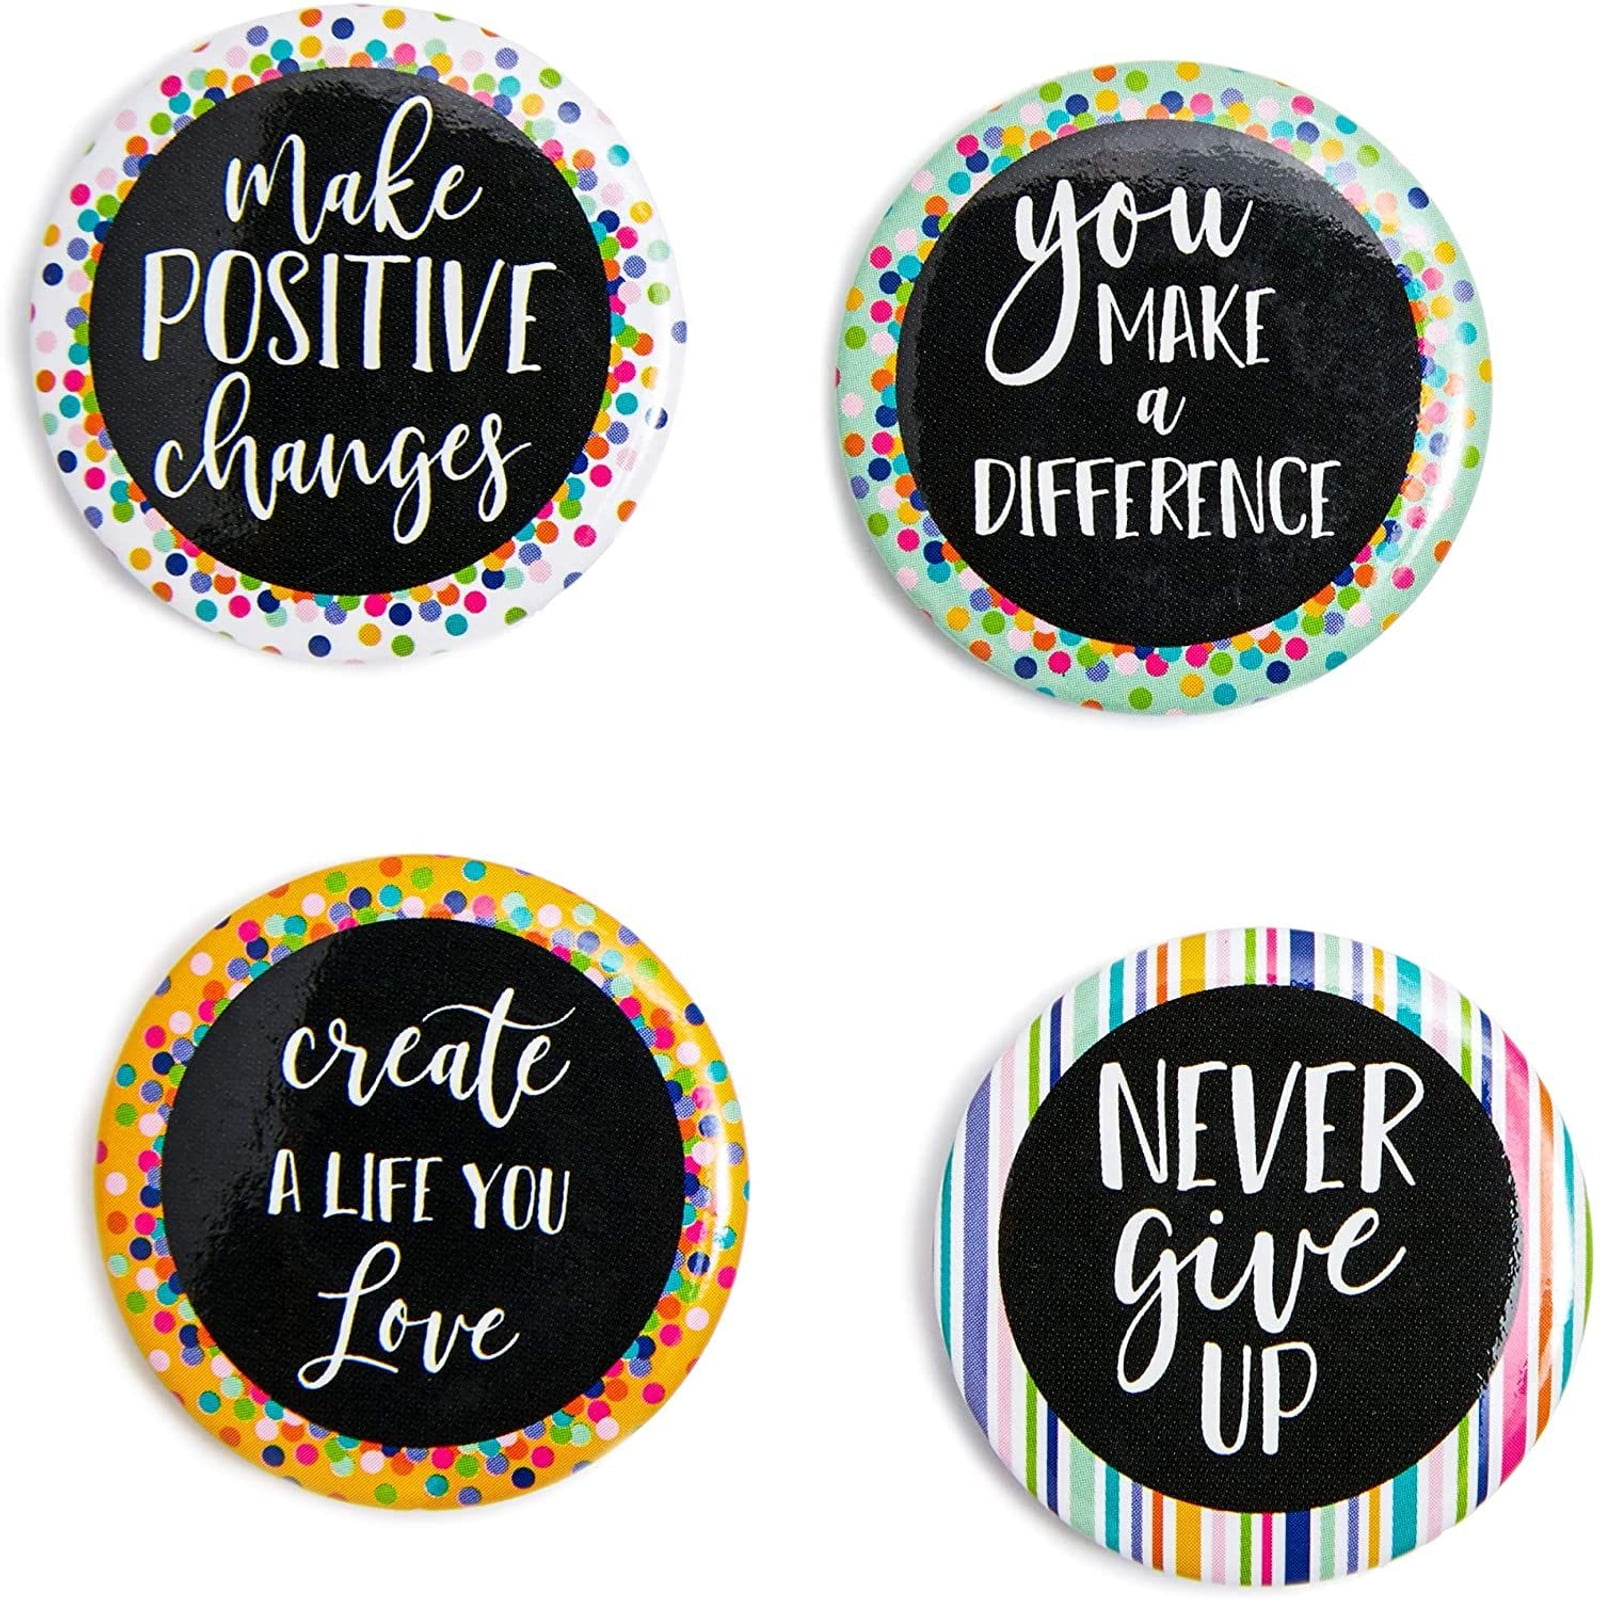 Motivational Quote Magnets Glass Refrigerator Magnets (Awesome Advices), 1.2'' Diameter x 0.34'' Thick